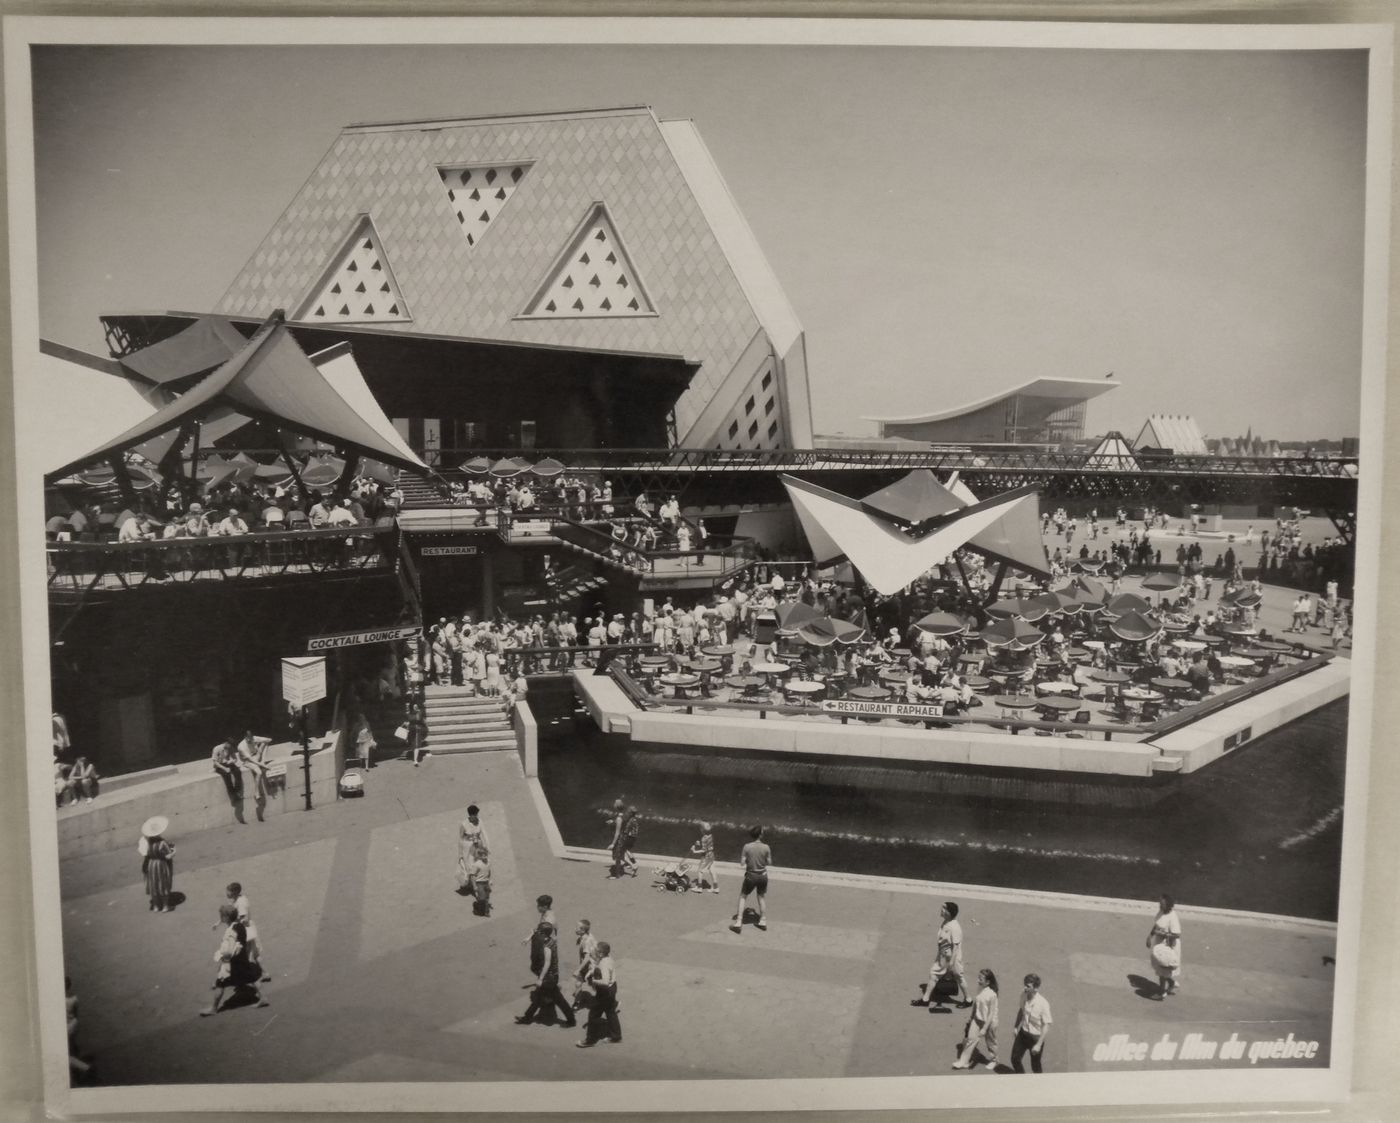 View of terraces at the Plaza of the Universe near the Man the Explorer Pavilion with the Pavilion of the Soviet Union in background, Expo 67, Montréal, Québec